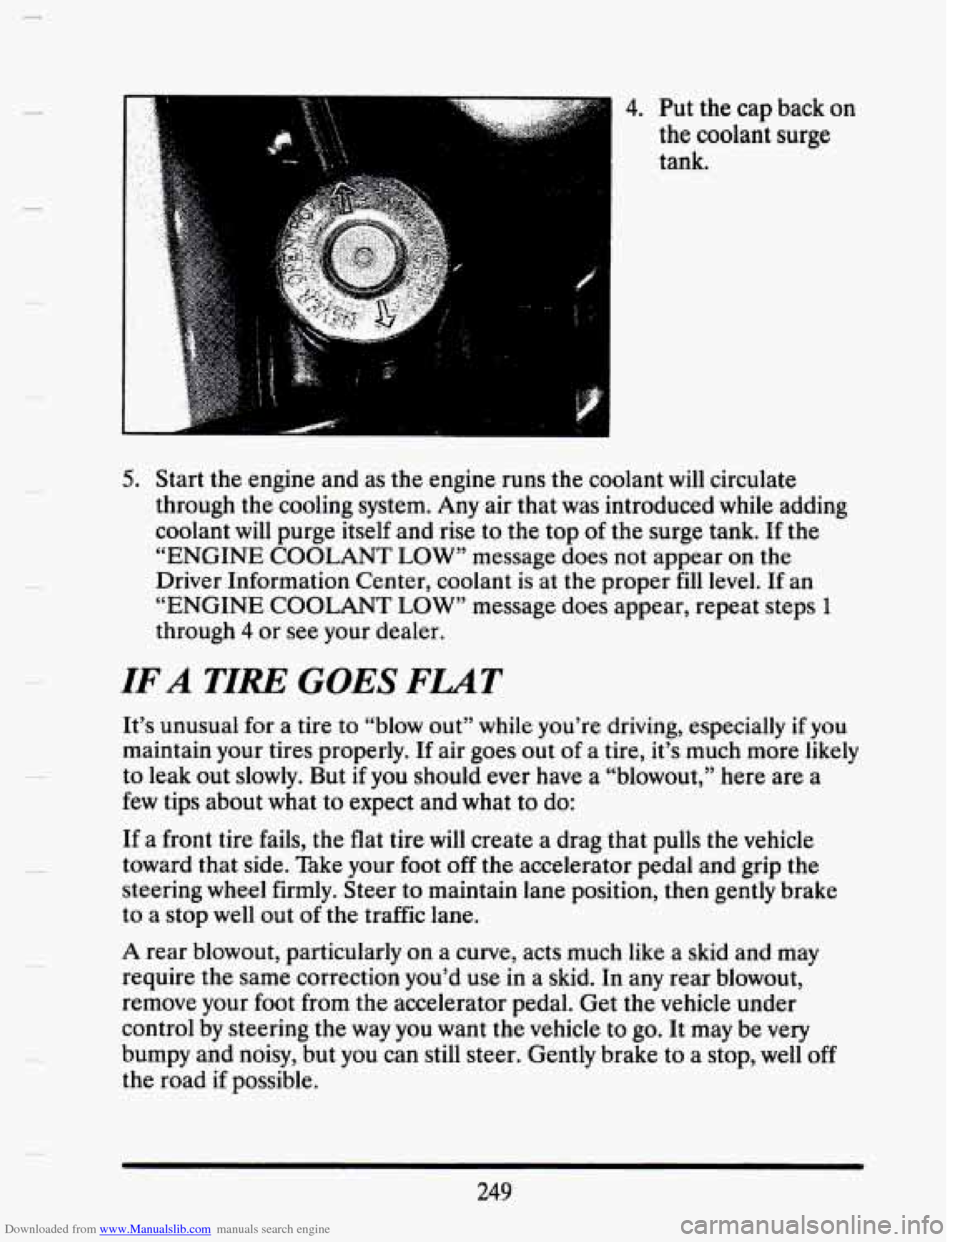 CADILLAC SEVILLE 1993 4.G Owners Manual Downloaded from www.Manualslib.com manuals search engine . : 4. Put the  cap  back on 
the  coolant 
surge 
tank. 
5. Start  the  engine and  as  the  engine runs  the coolant  will circulate 
through